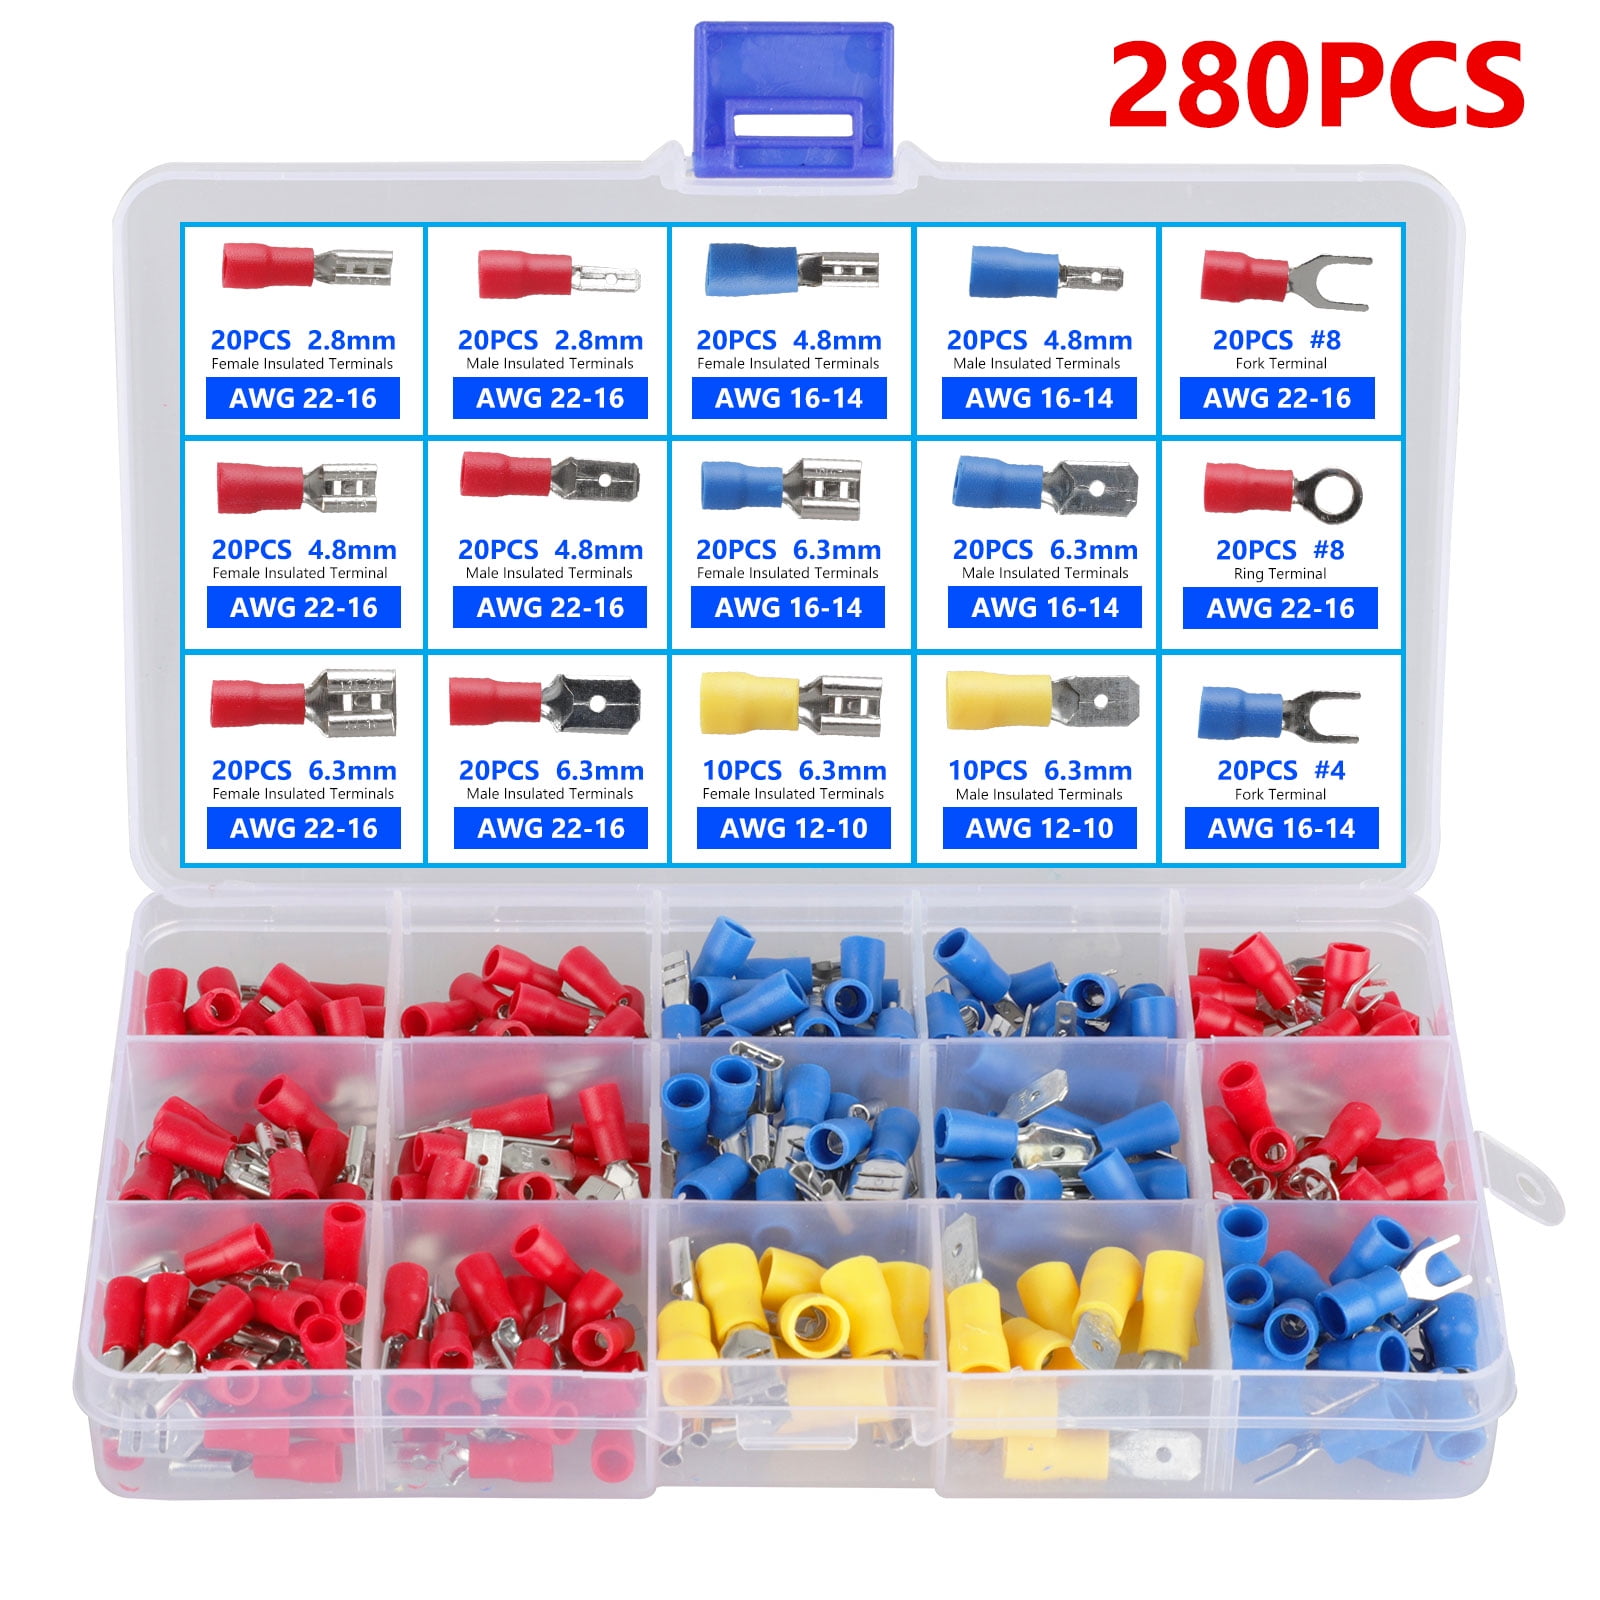 280 PCS Insulated Wire Electrical Connectors Assortment - Butt, Ring, Spade,  Quick Disconnect - Crimp Marine Automotive Cable Terminals 